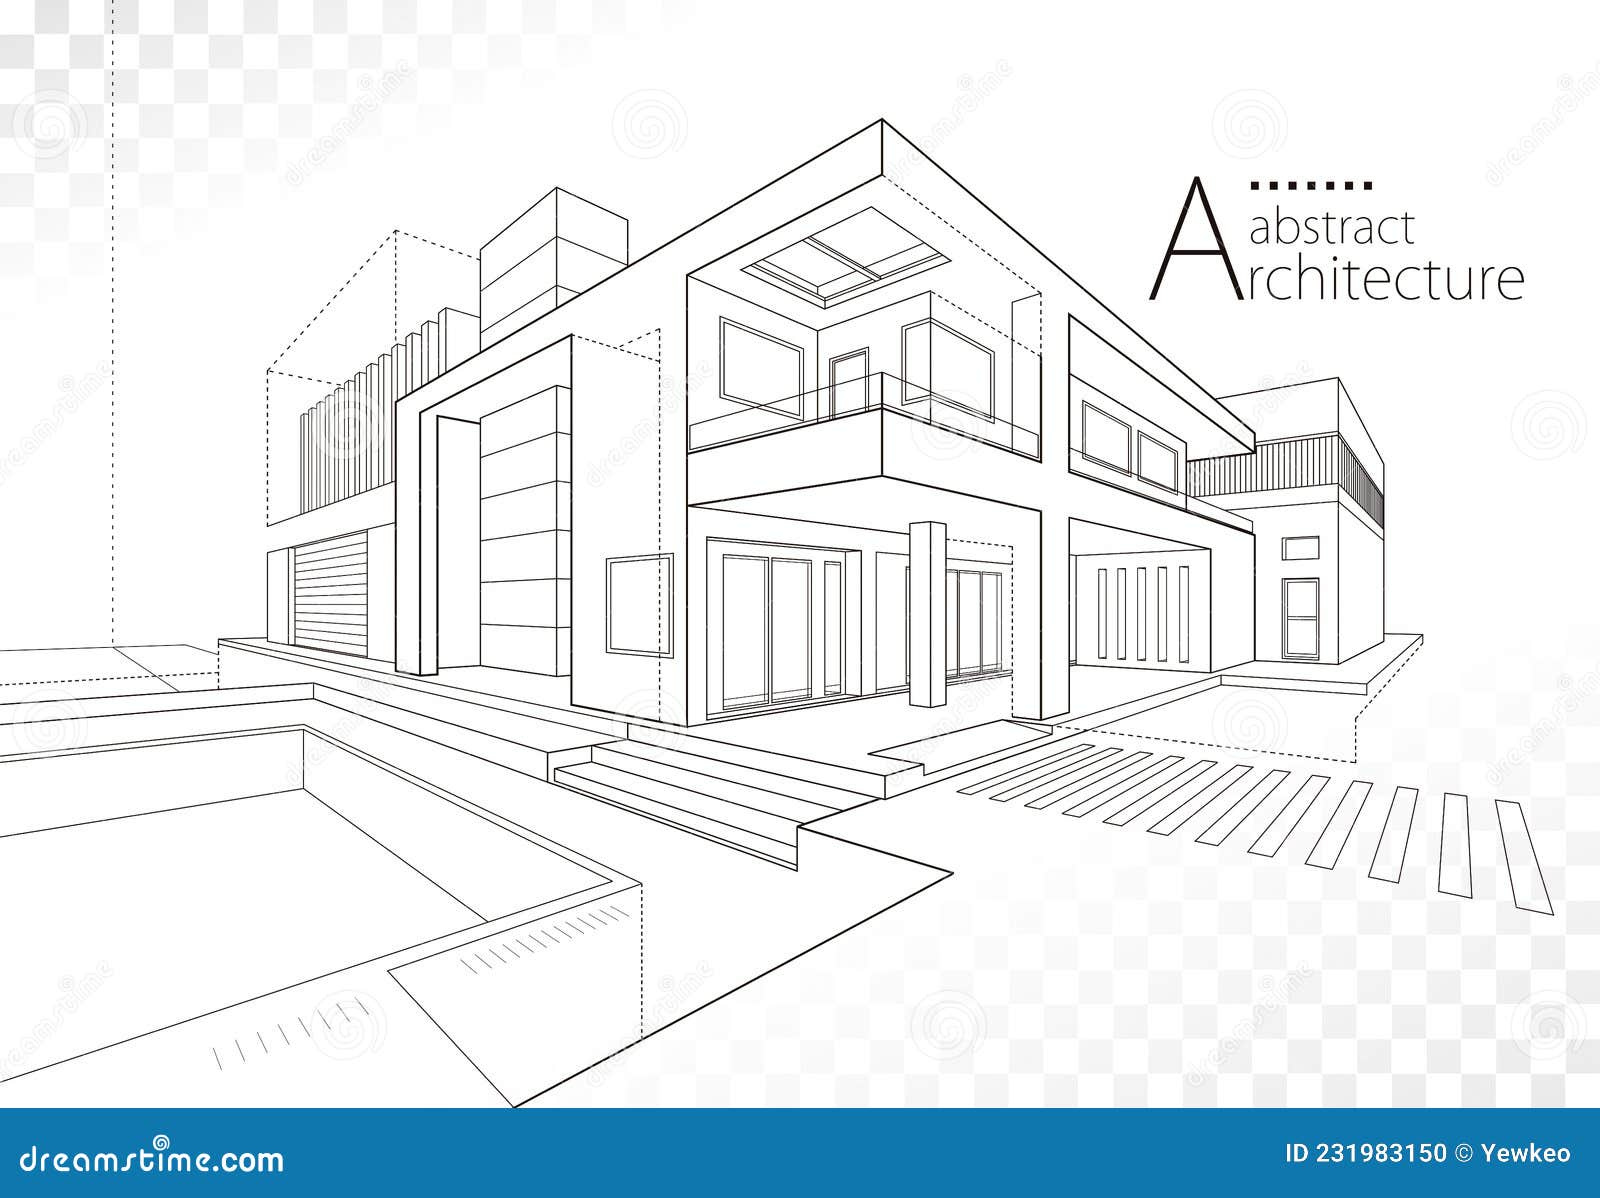 Architectural Sketches  Apps on Google Play